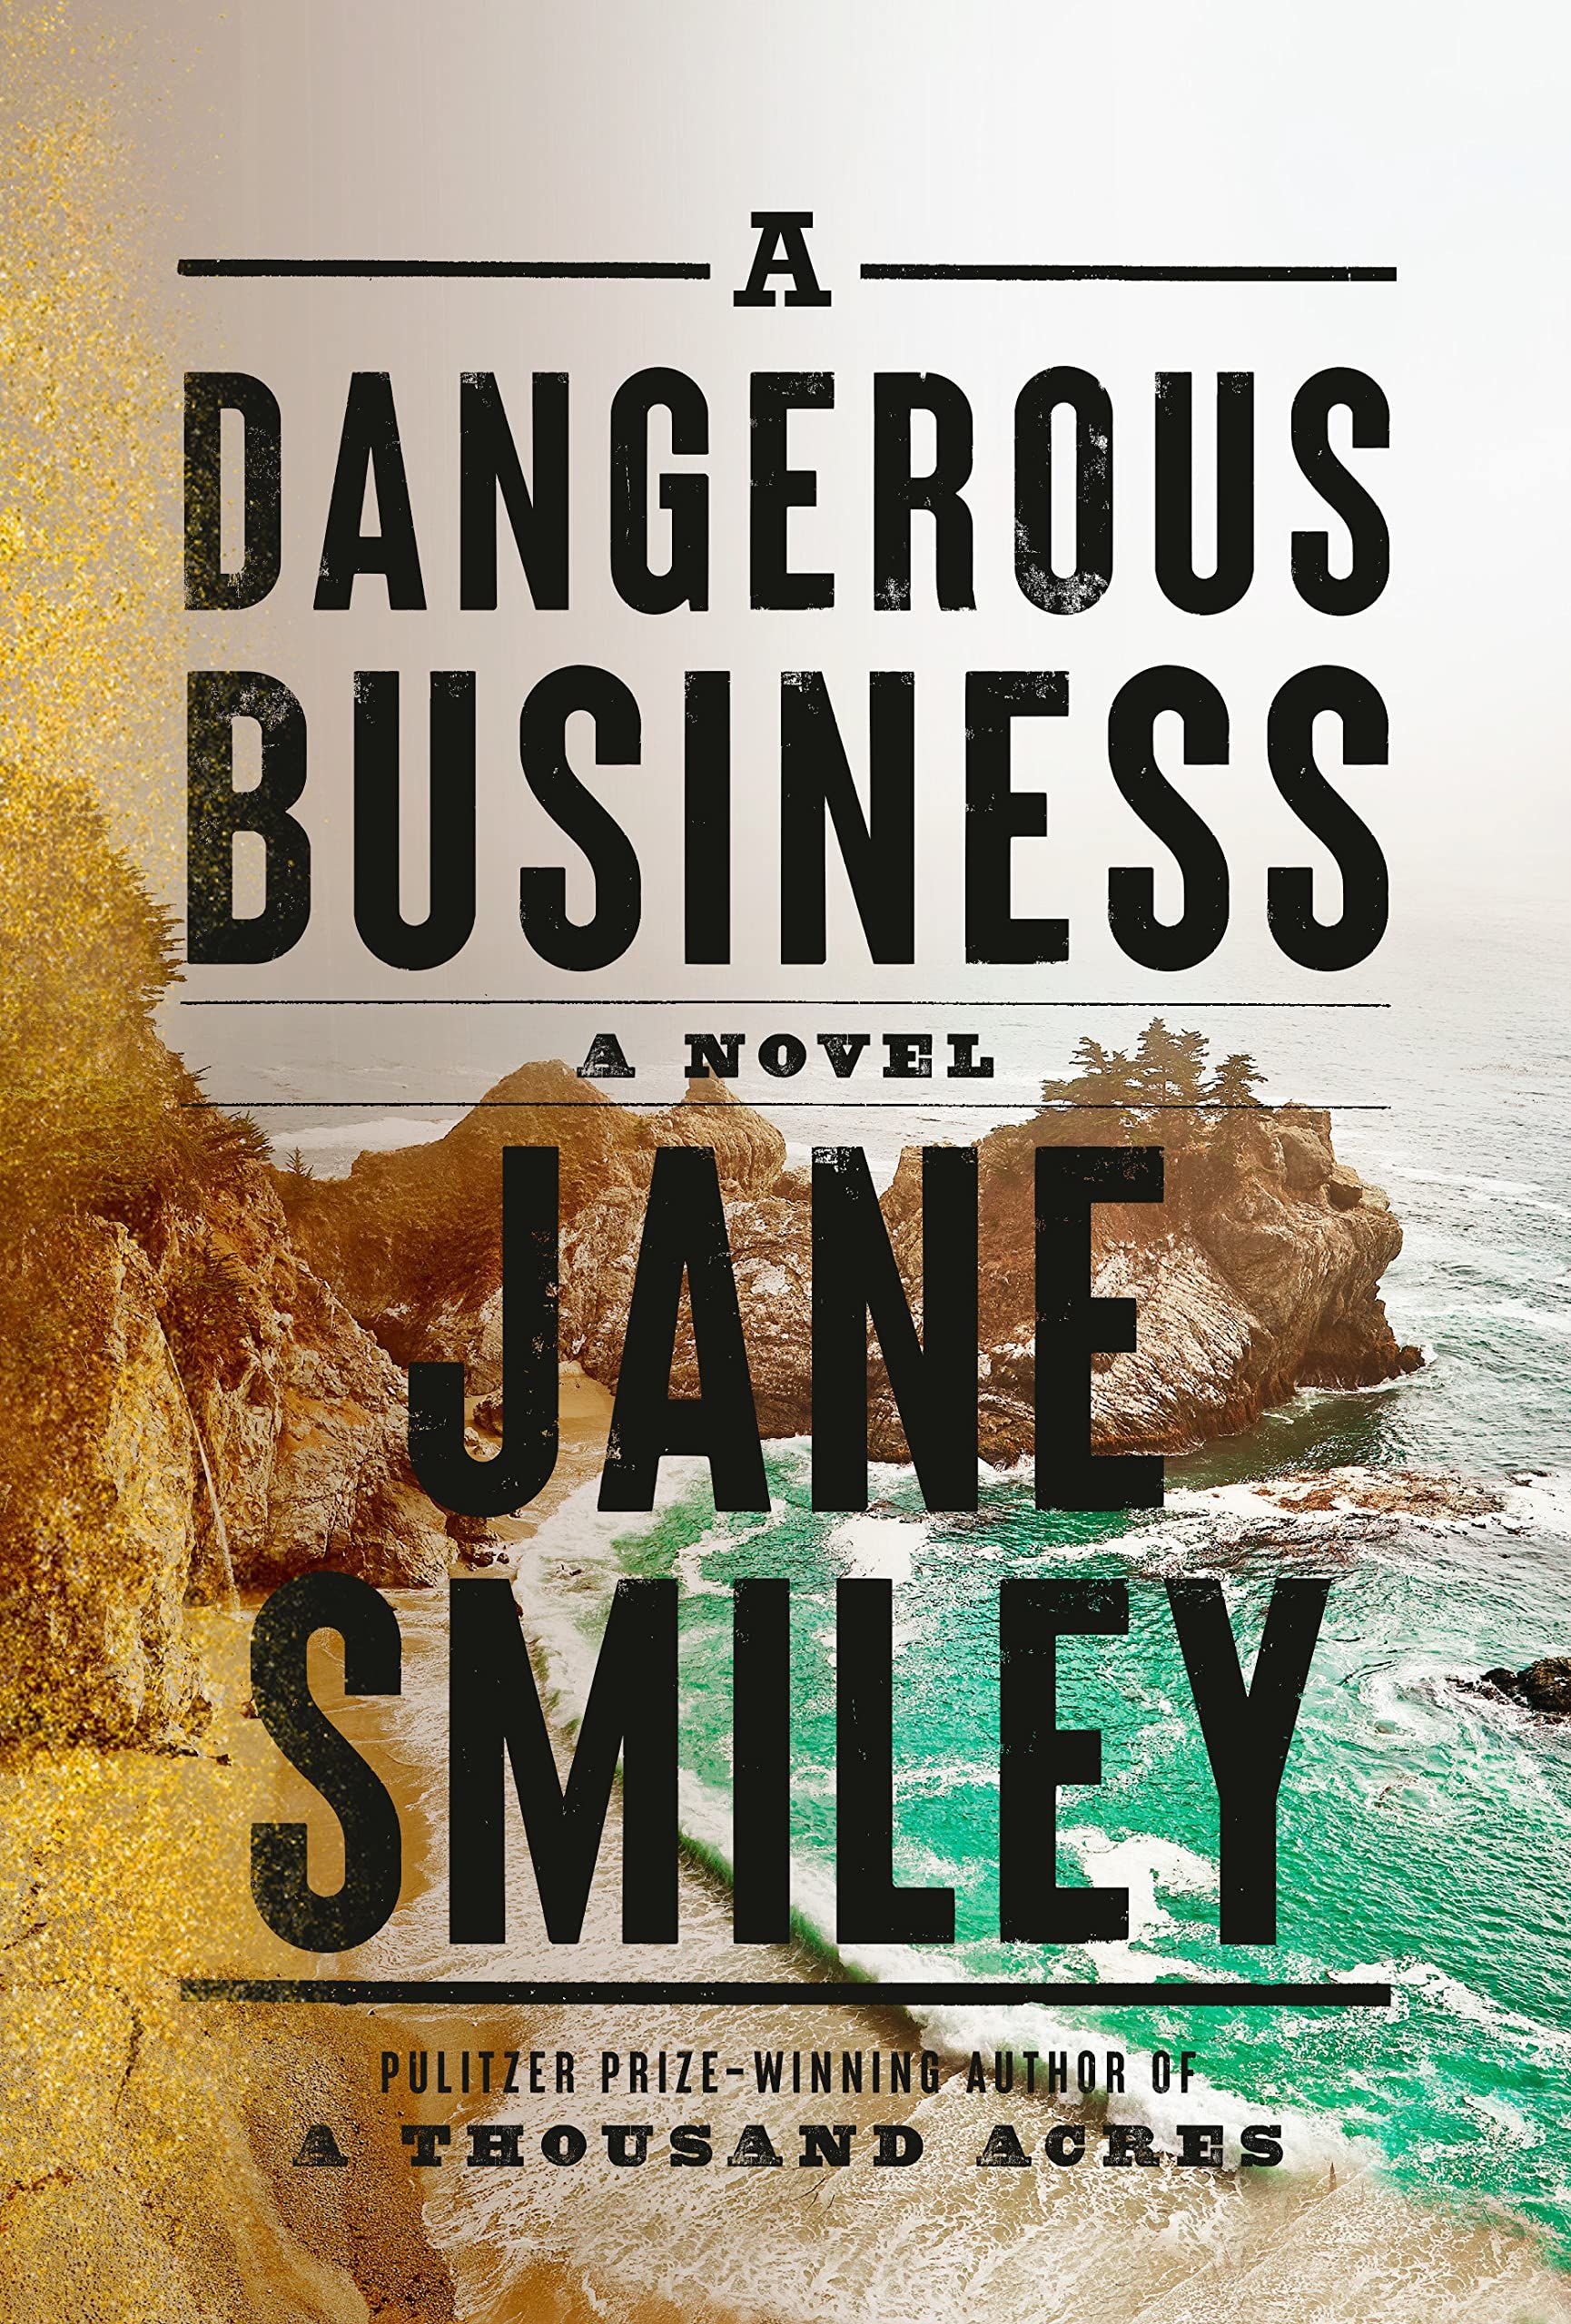 cover of a dangerous business